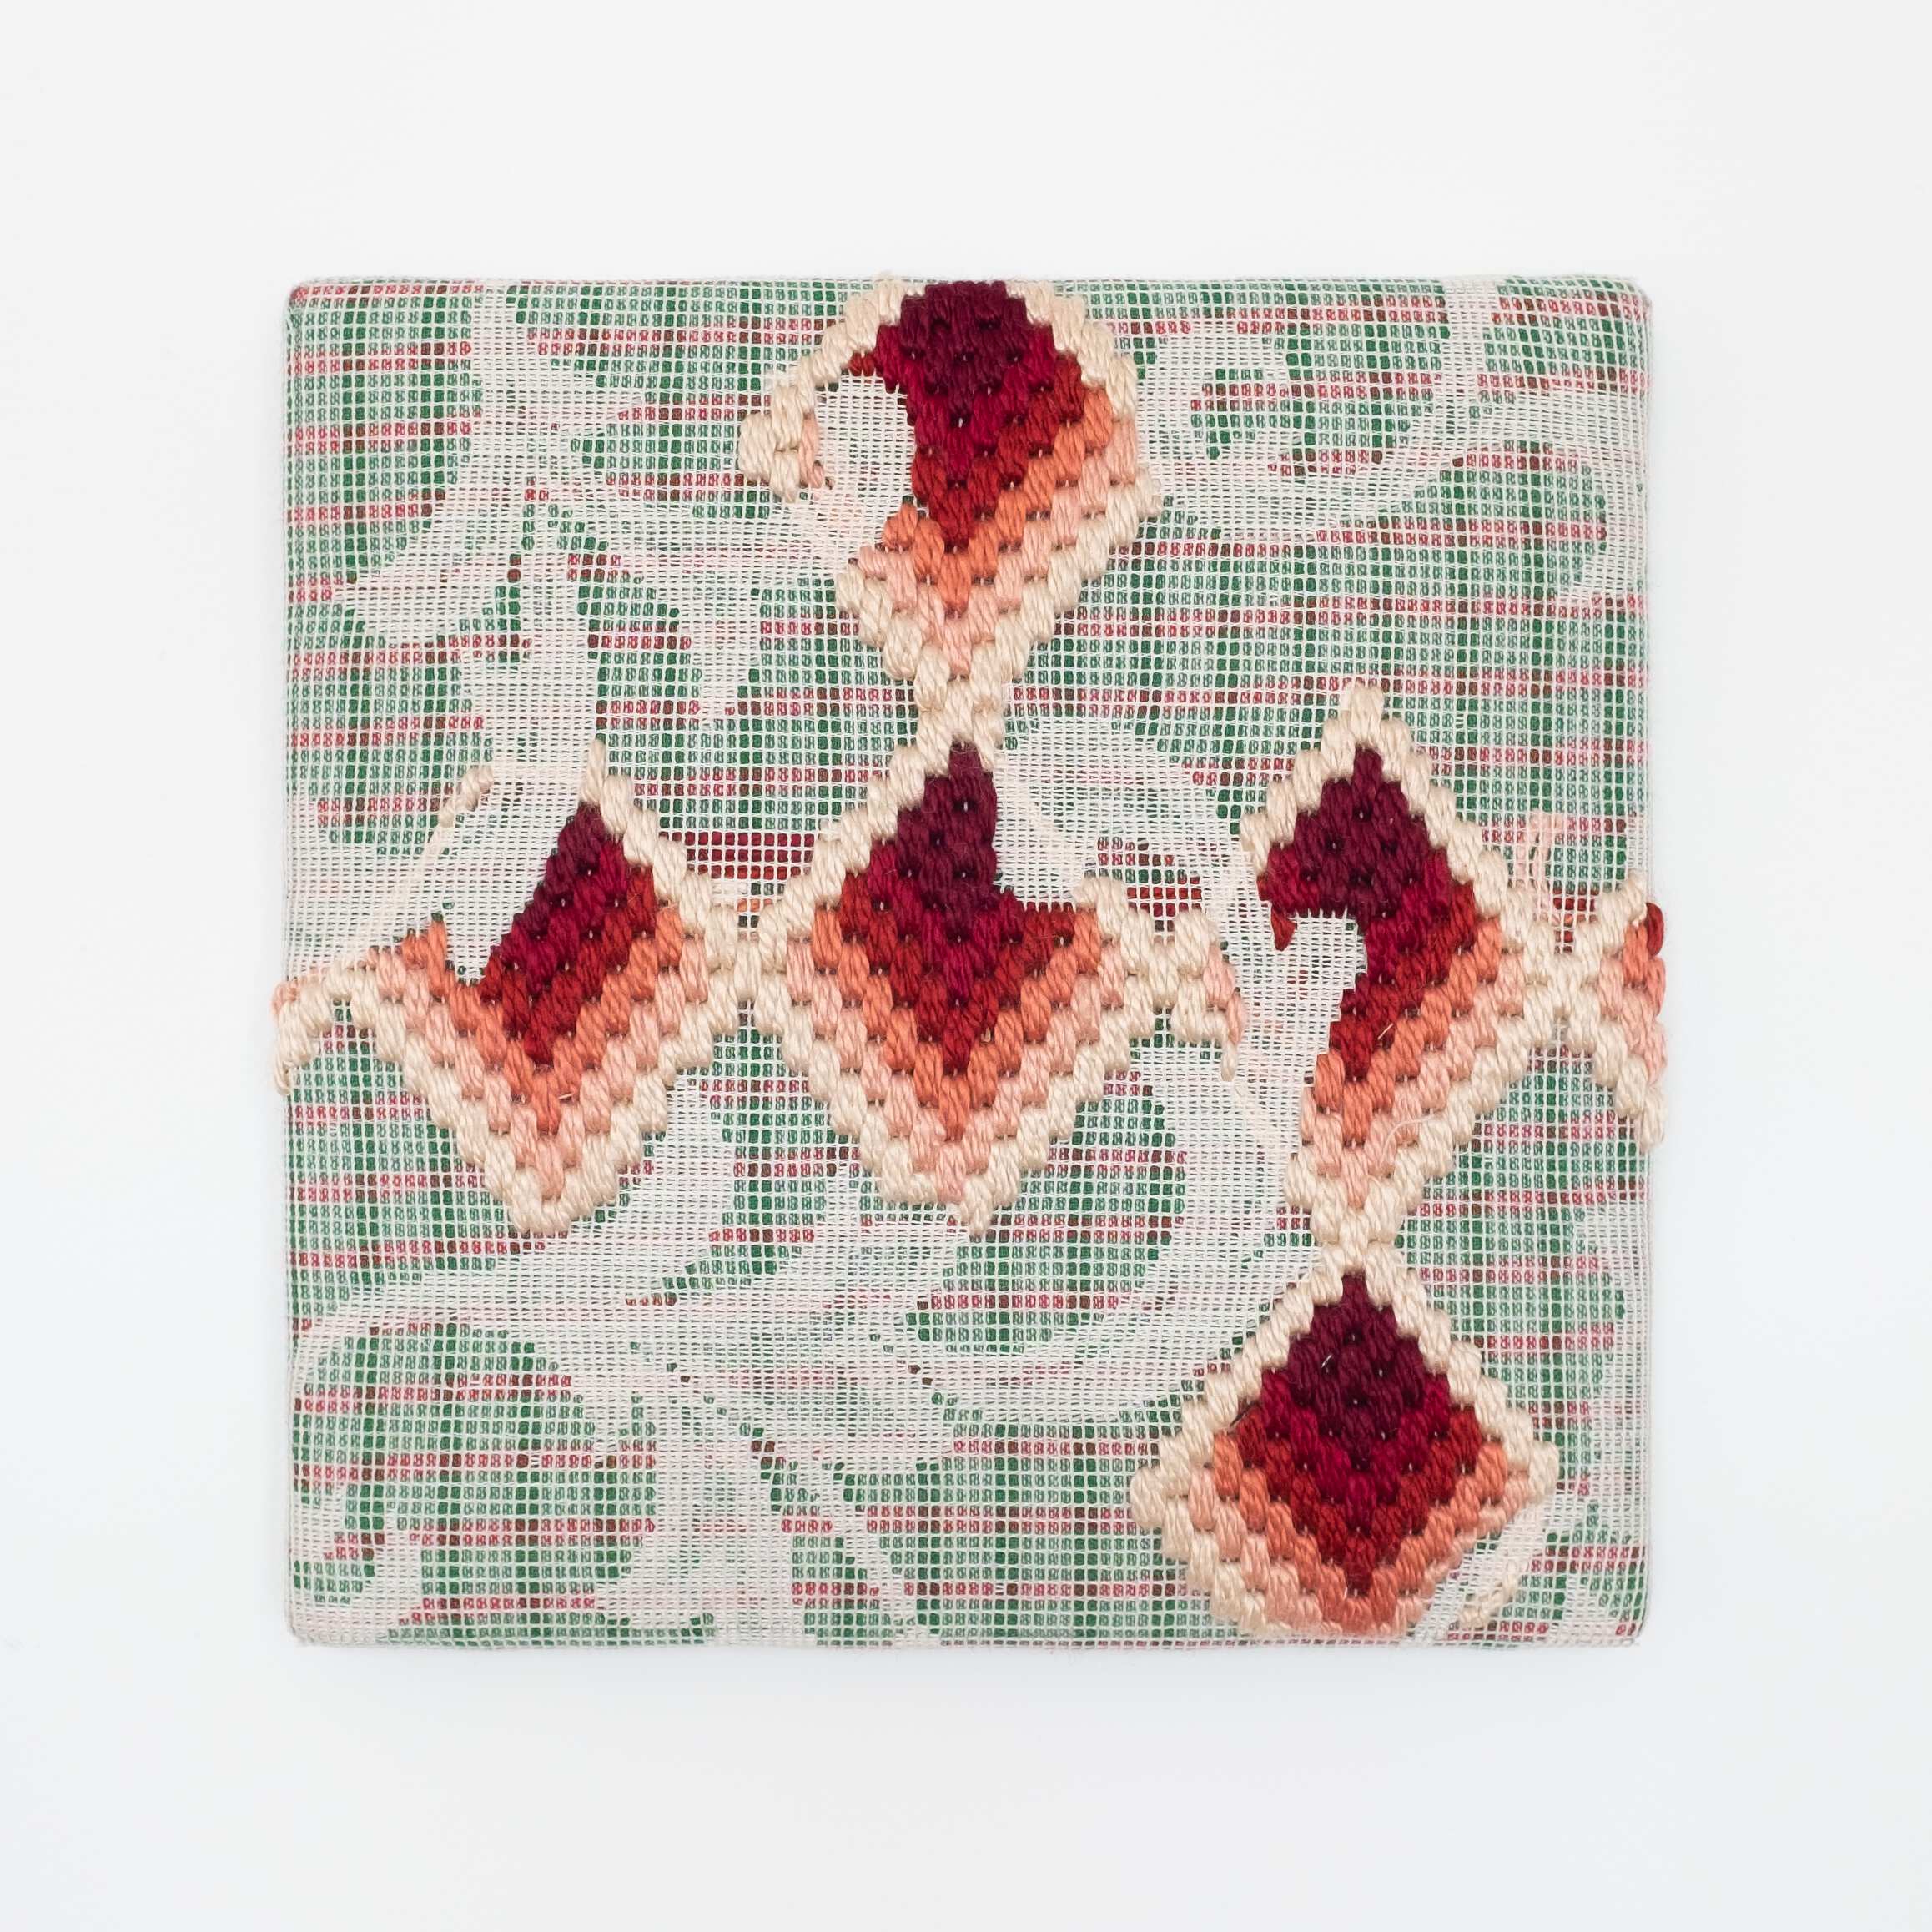 Triple-layer gather-gusset [red squares], Hand-embroidered silk on lace over fabric, 2019